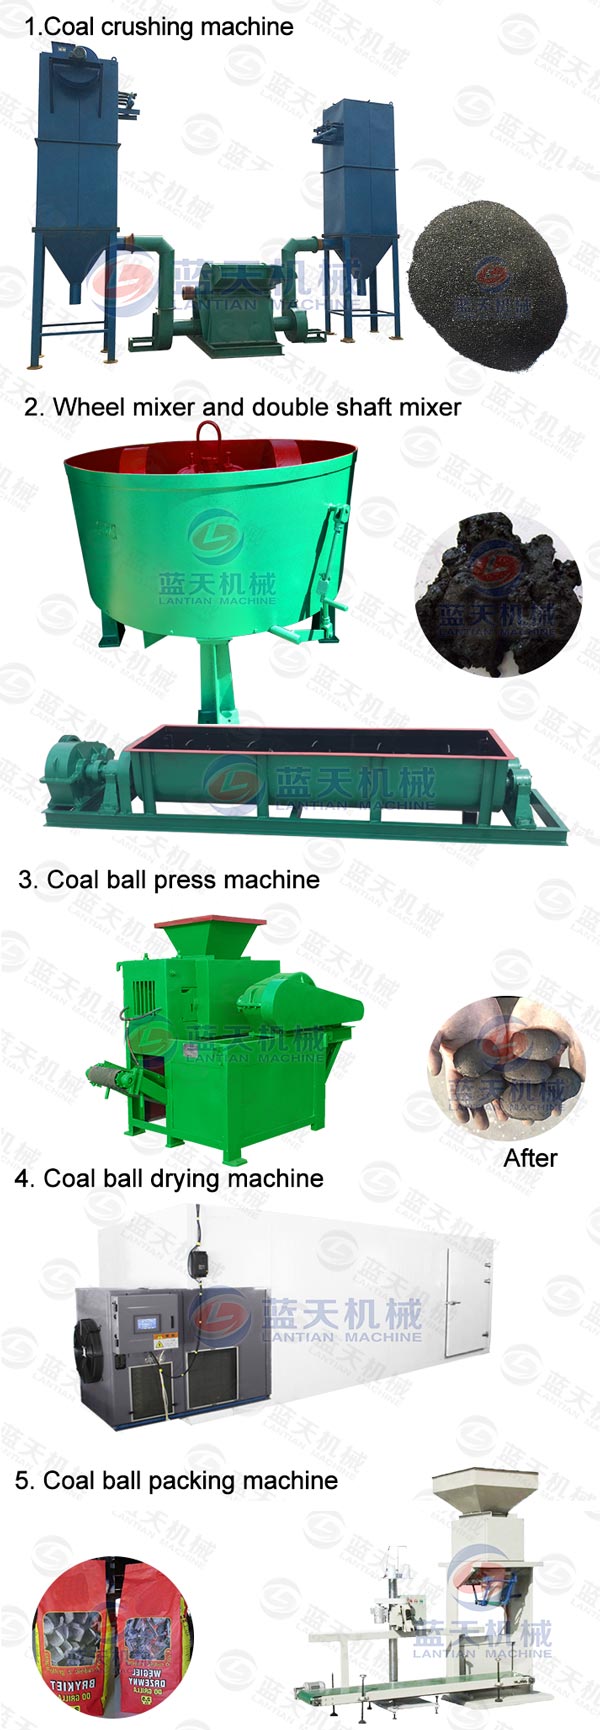 Product line of coal ball packing machine